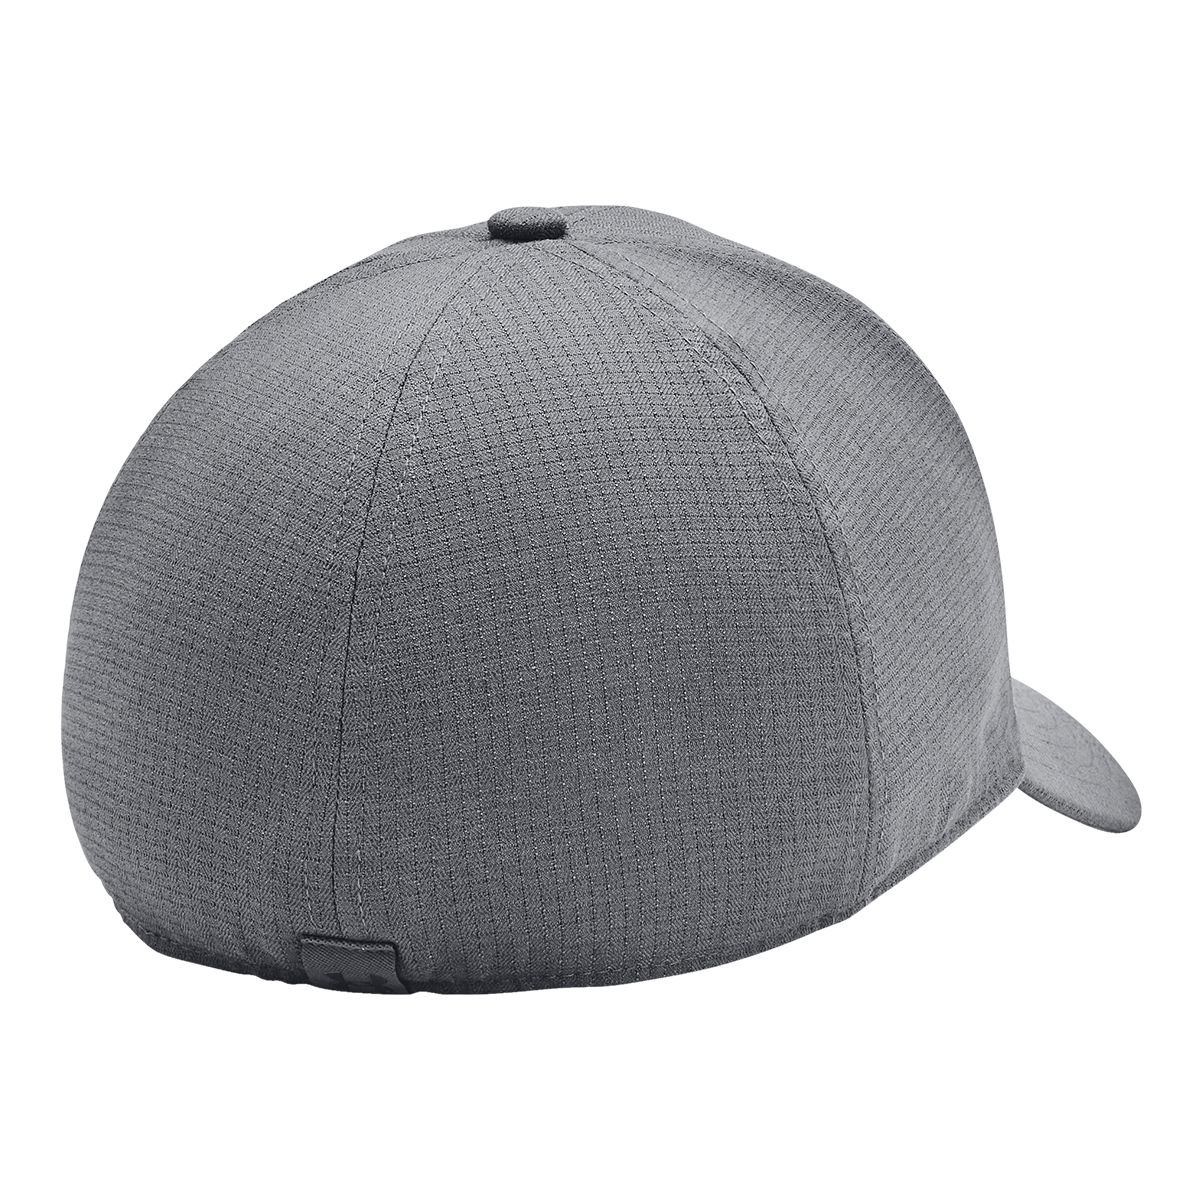 Under Armour Men's Iso-Chill ArmourVent™ Stretch Cap